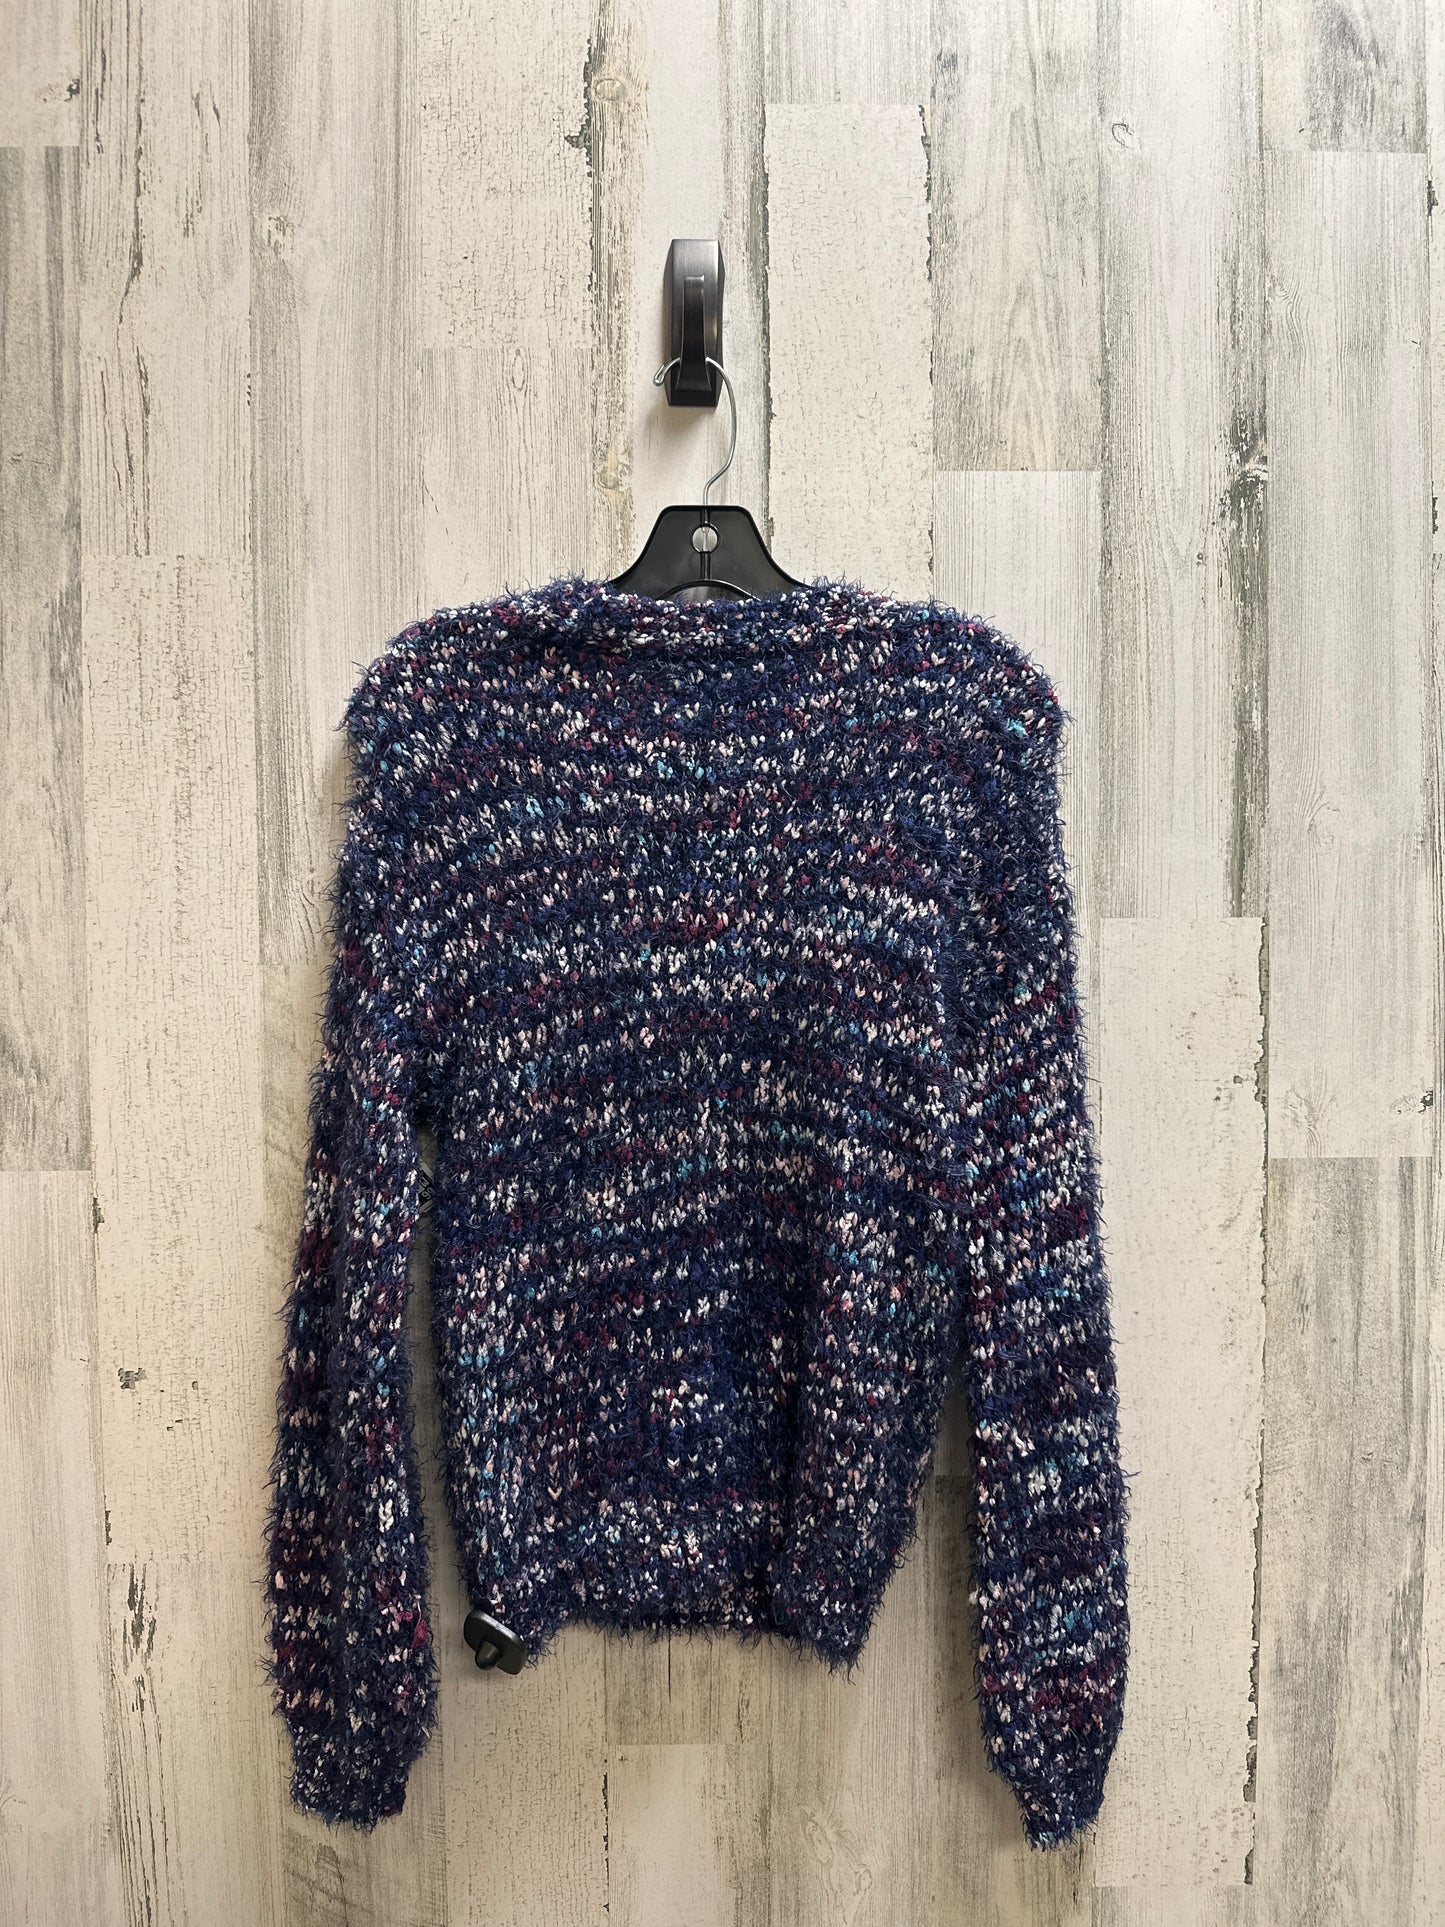 Sweater By Wild Fable  Size: Xs